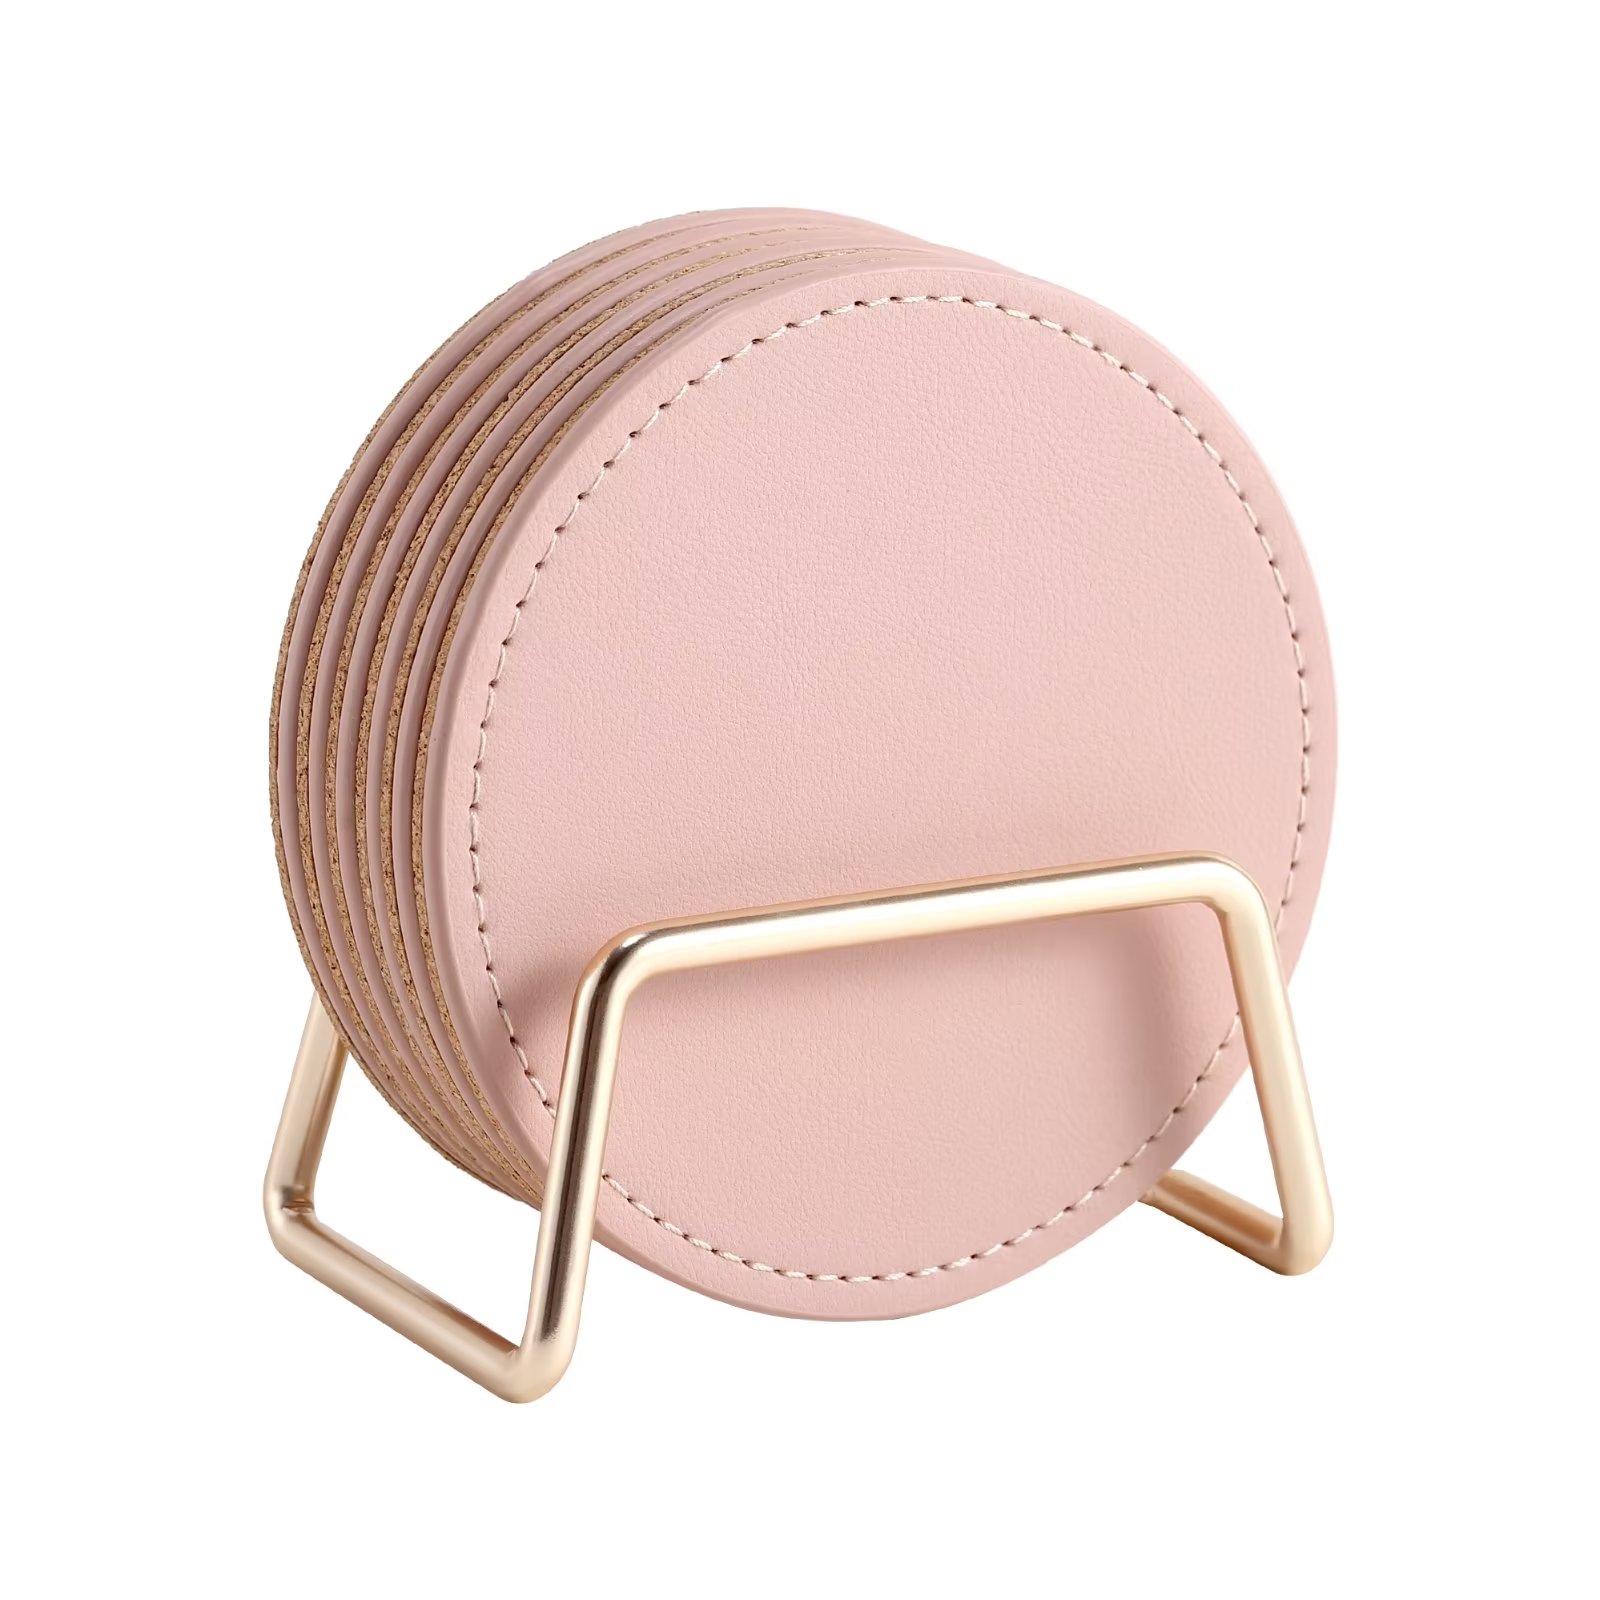 Casegrace Set of 6 Leather Coasters With Metal Holder Home Decorative Waterproof Cup Mat Kitchen Desktop Drink Coaster Set with Cork Base Pink